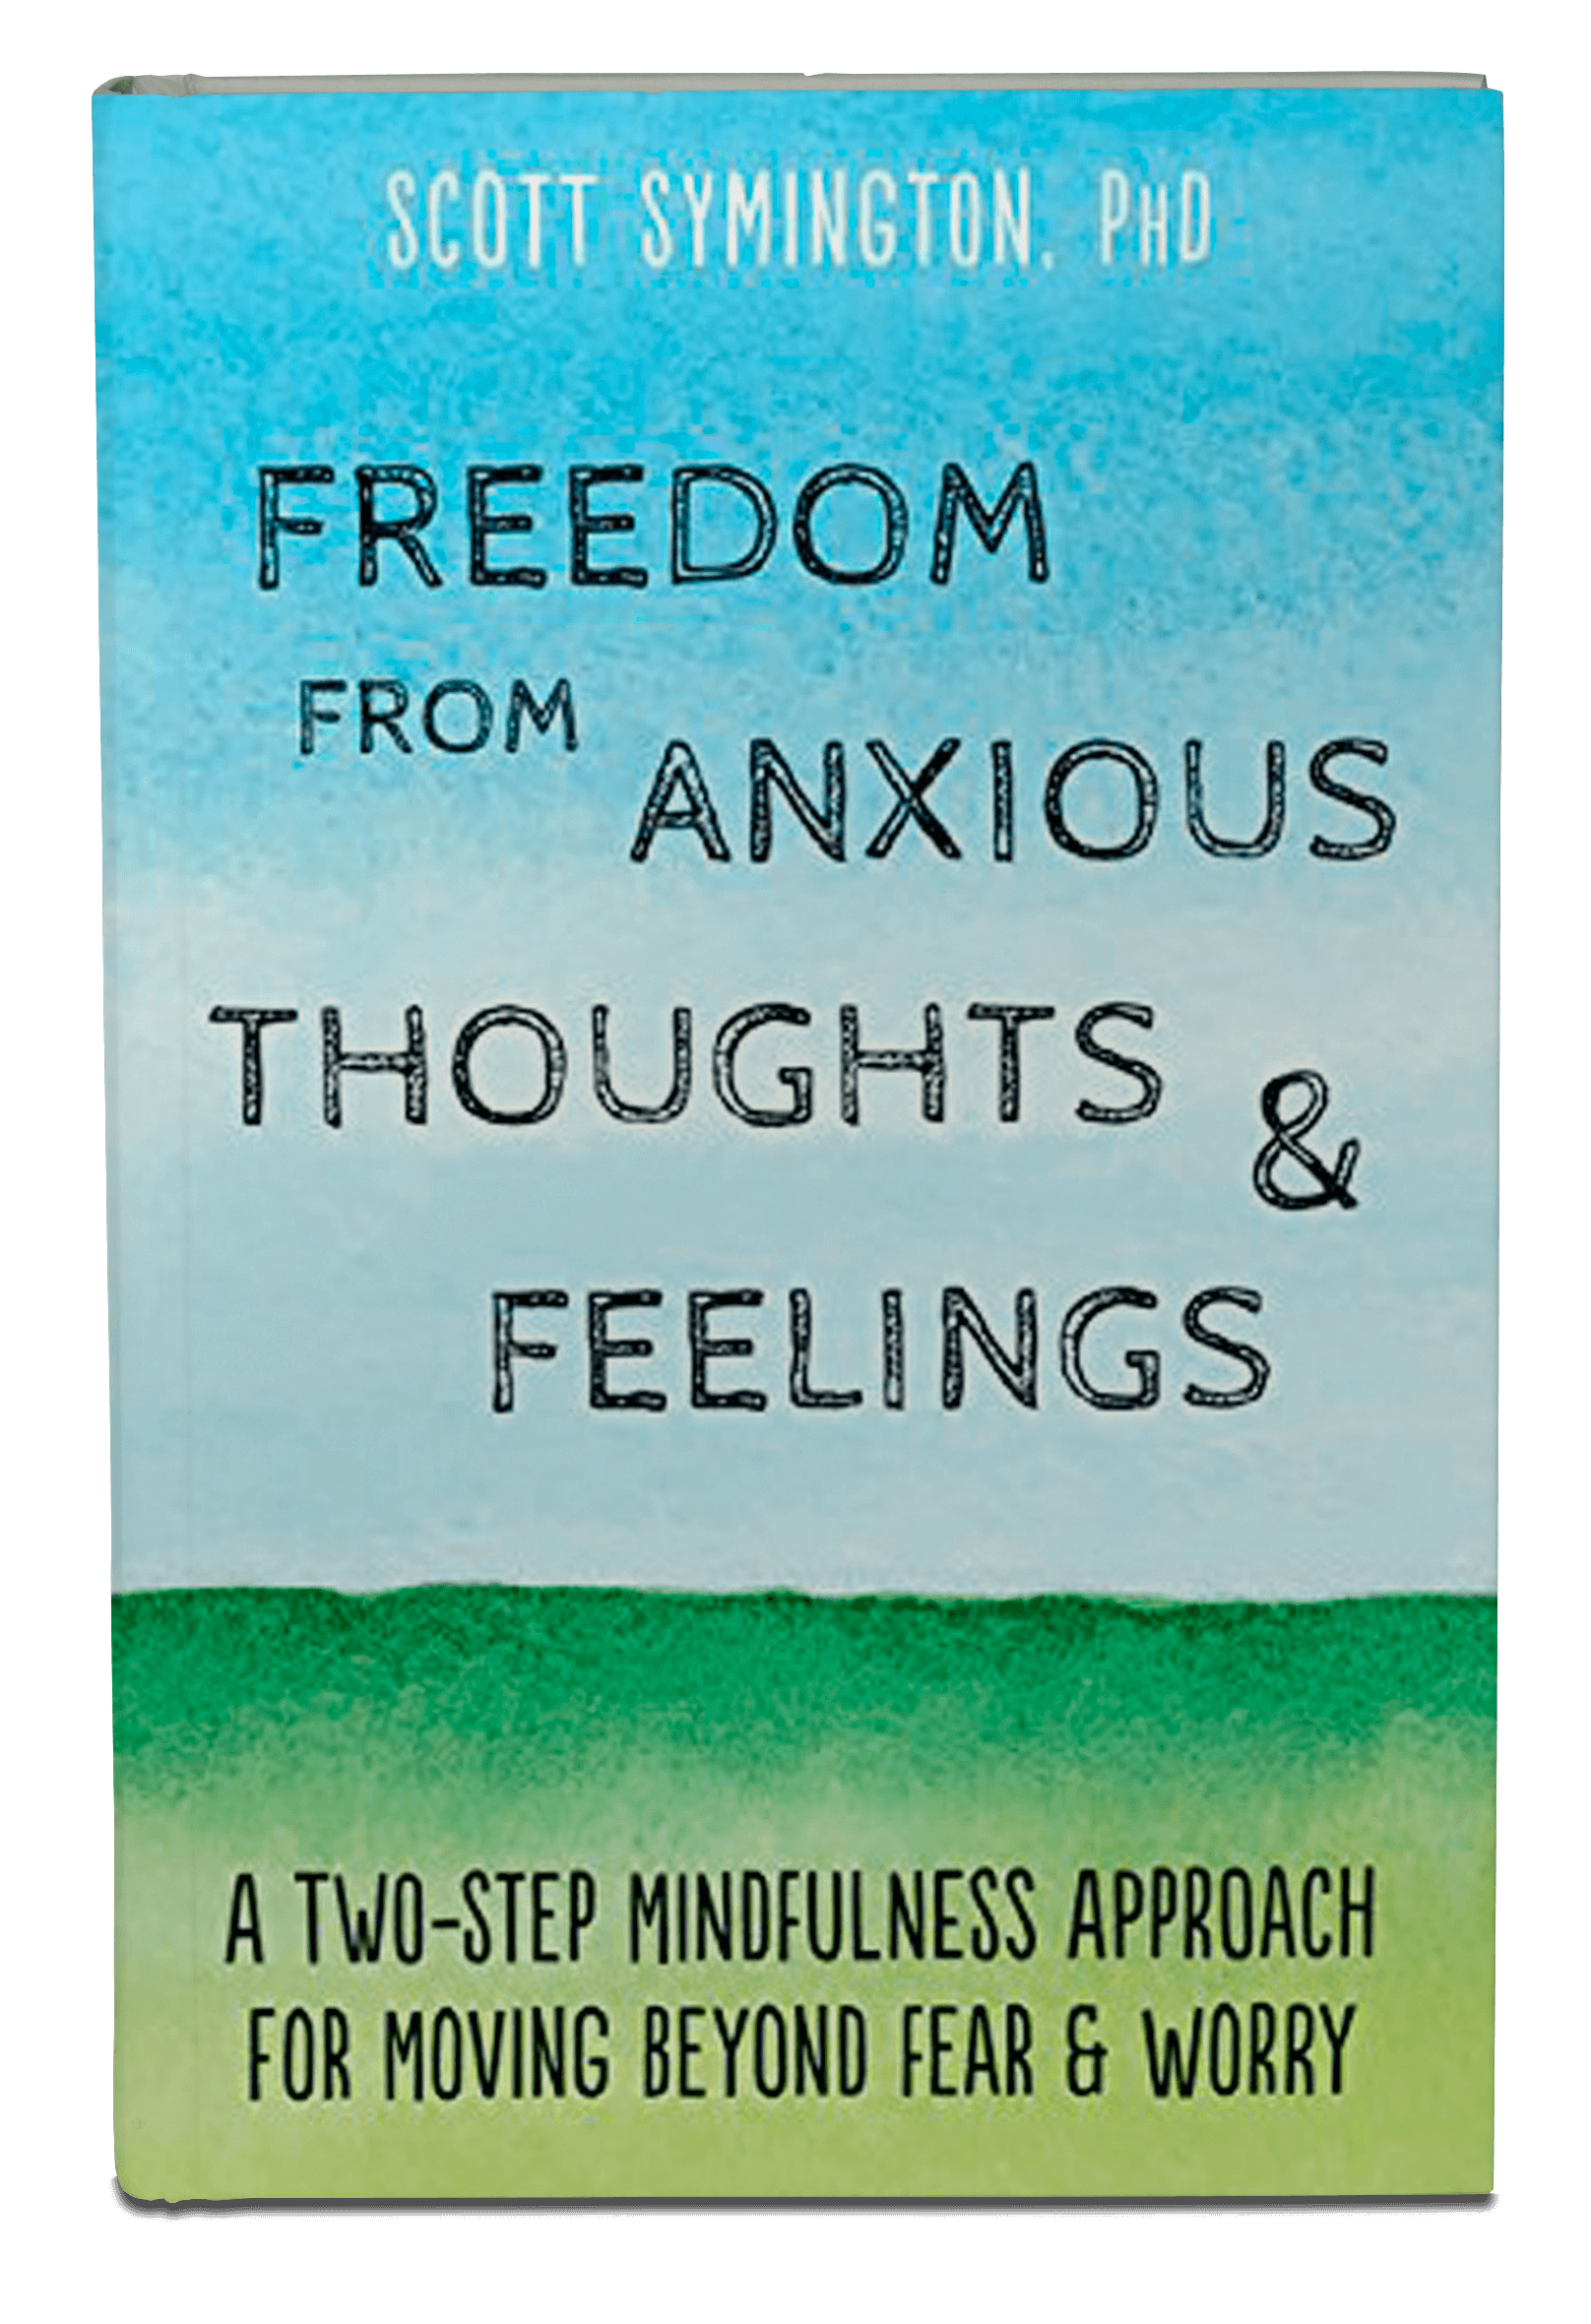 Freedom-from-anxious-thoughts-and-feelings-dr-scott-symington